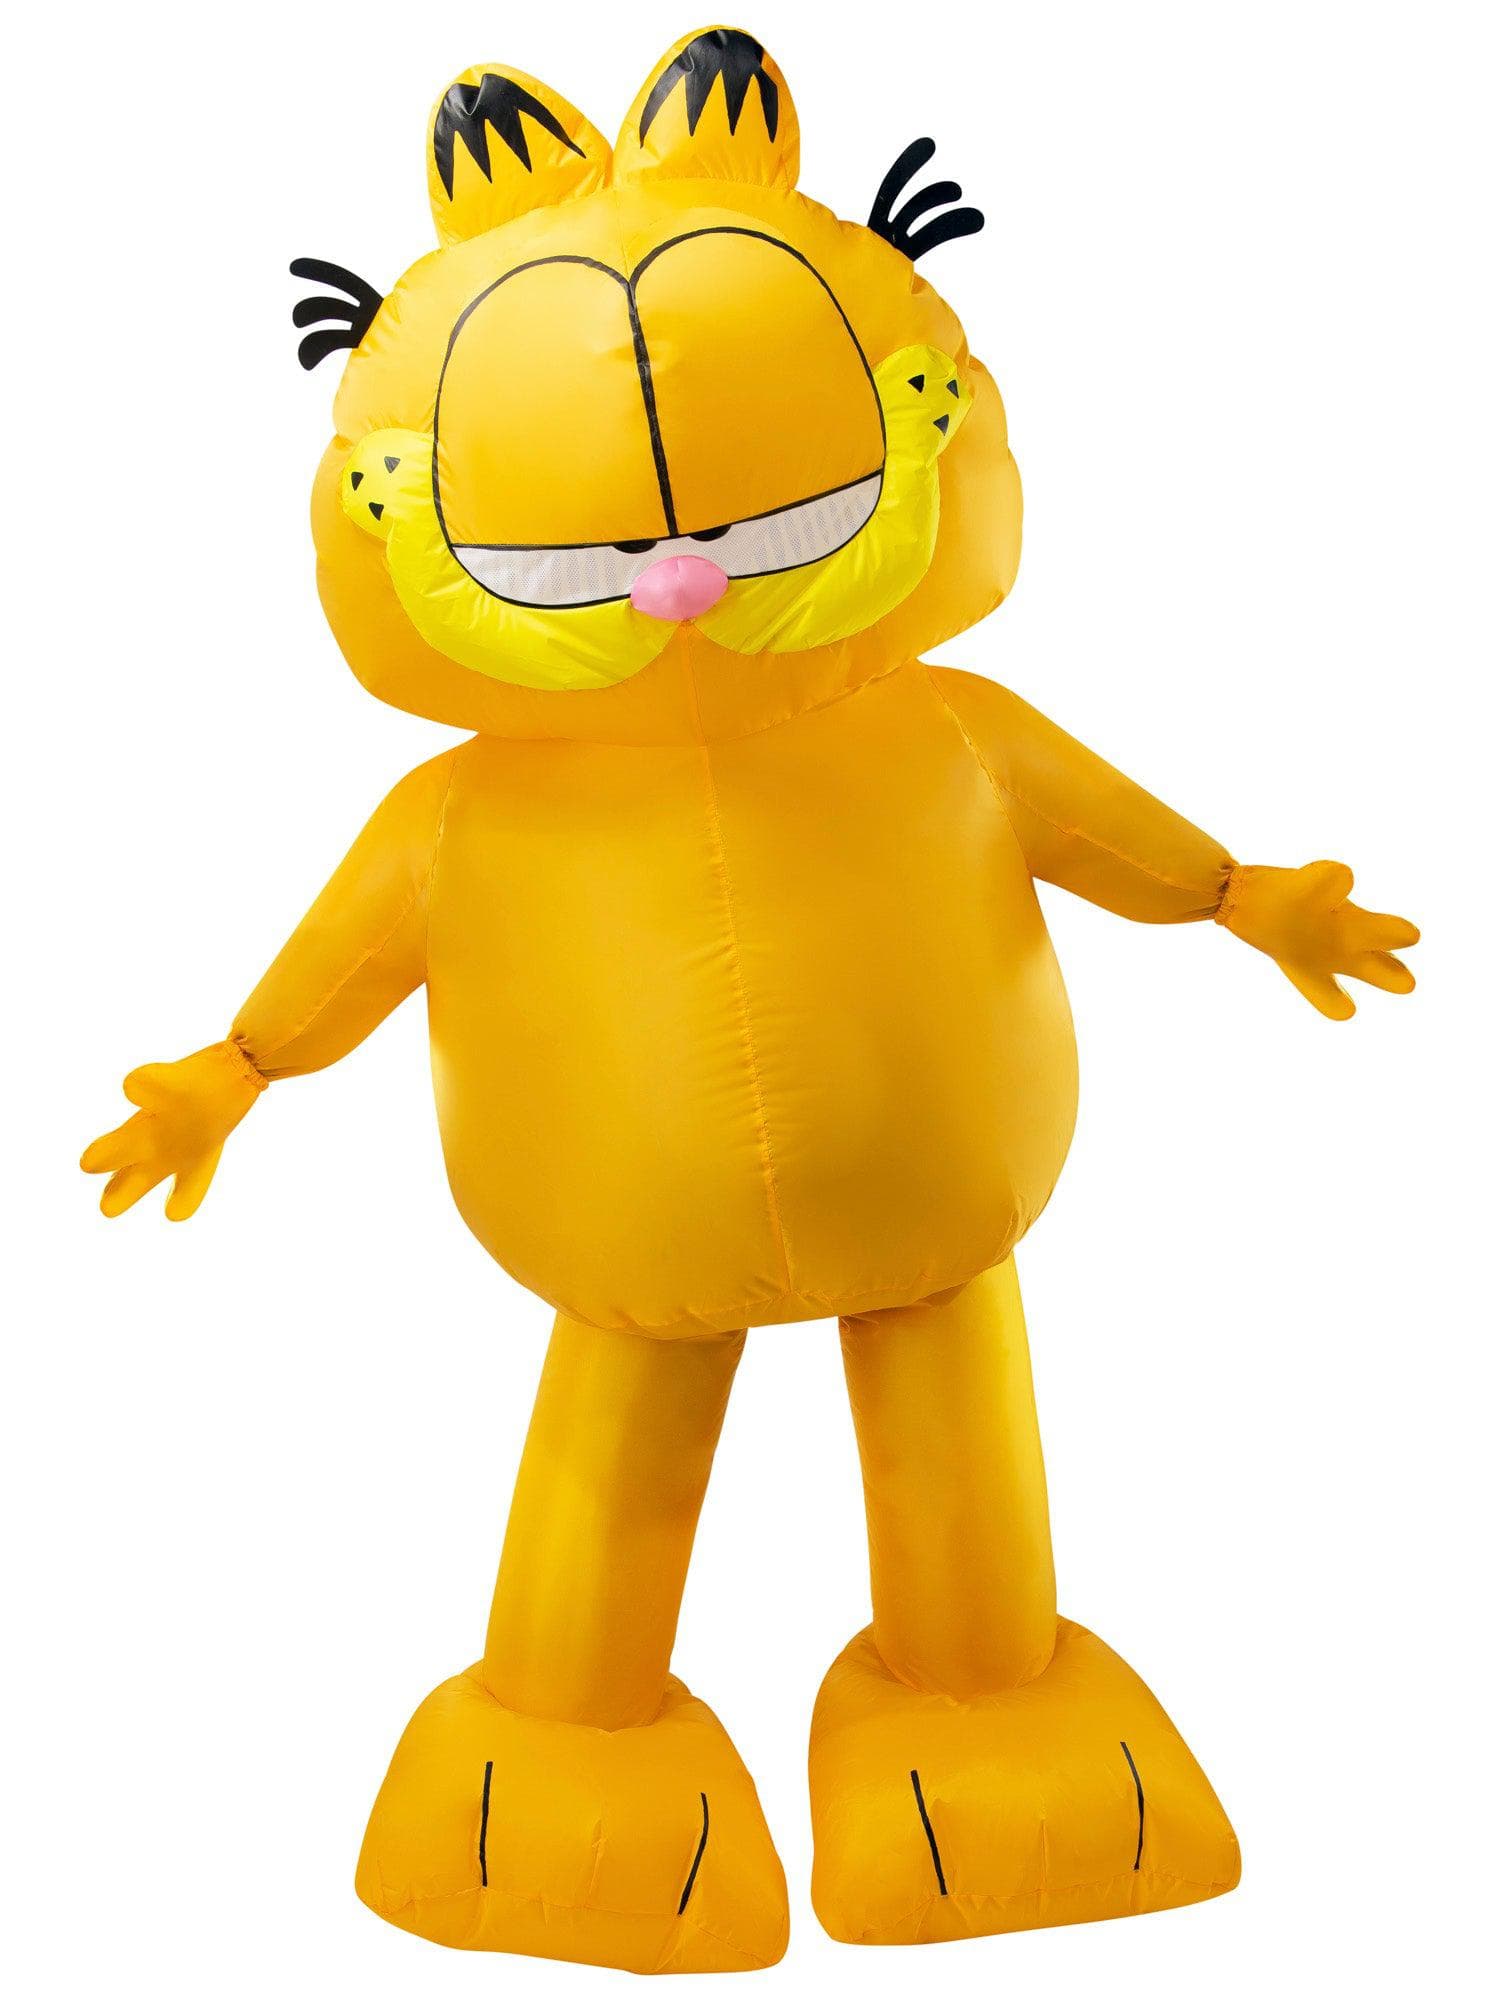 Adult Garfield Inflatable Costume - costumes.com